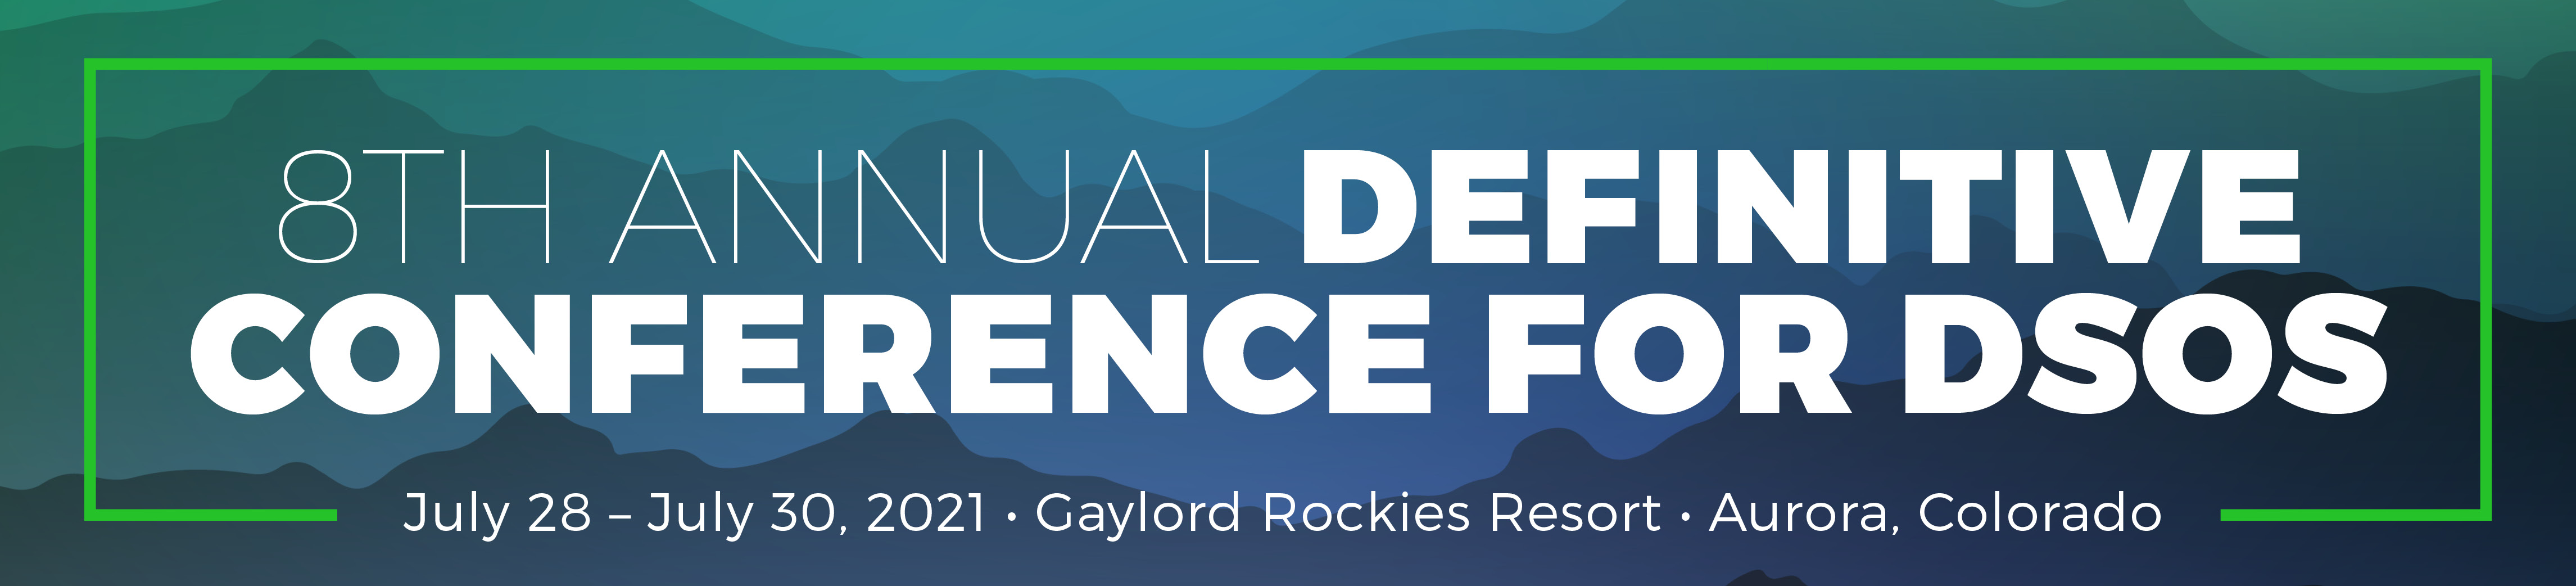 Gaylord Rockies 2021 Venue for Dykema's Definitive Conference for DSOs